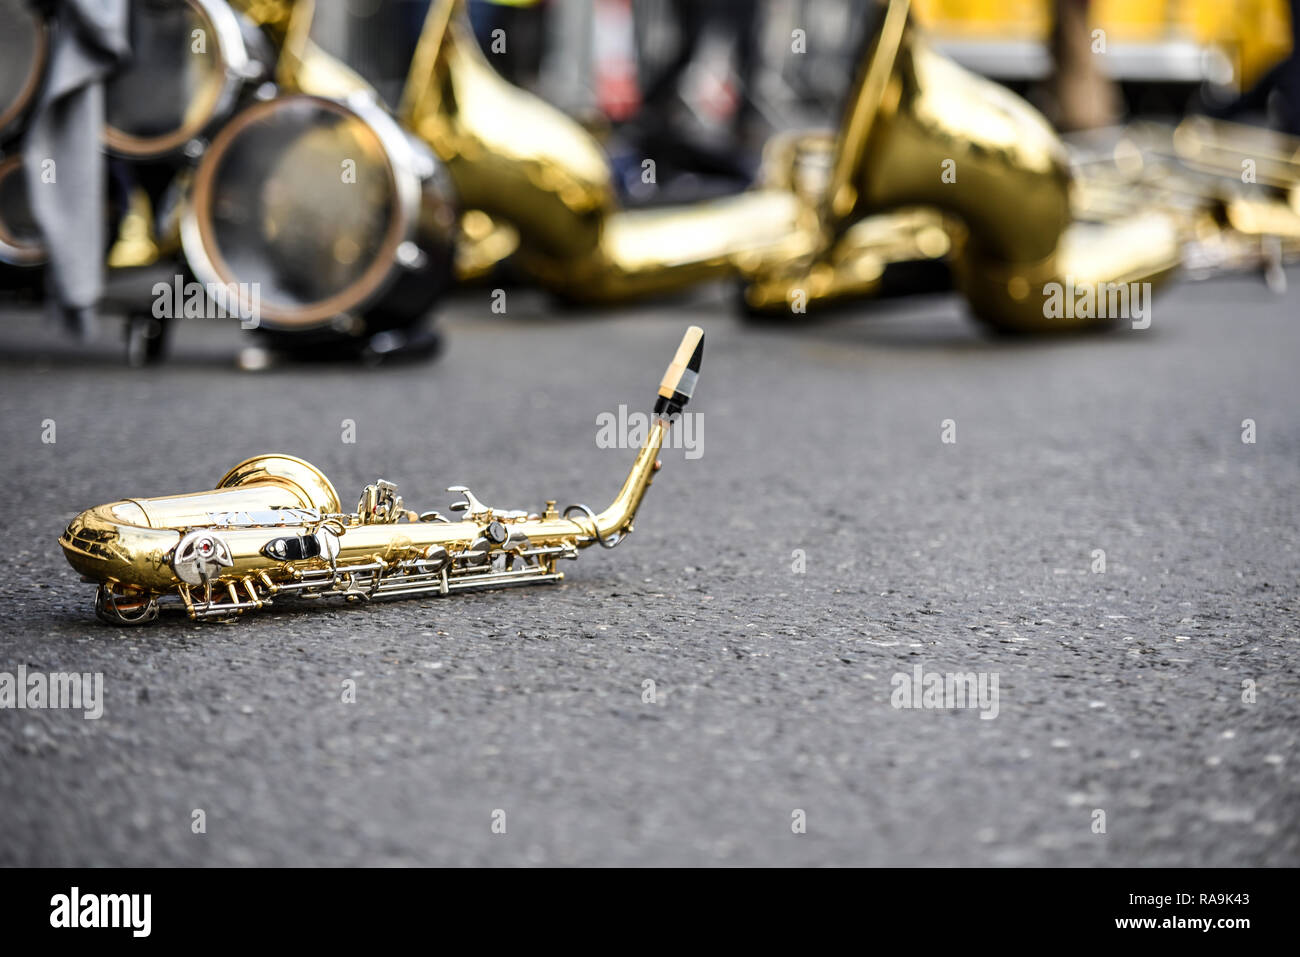 Saxophone on the floor isolated from other brass instruments at London's New Year's Day Parade, UK. Preparation for event Stock Photo